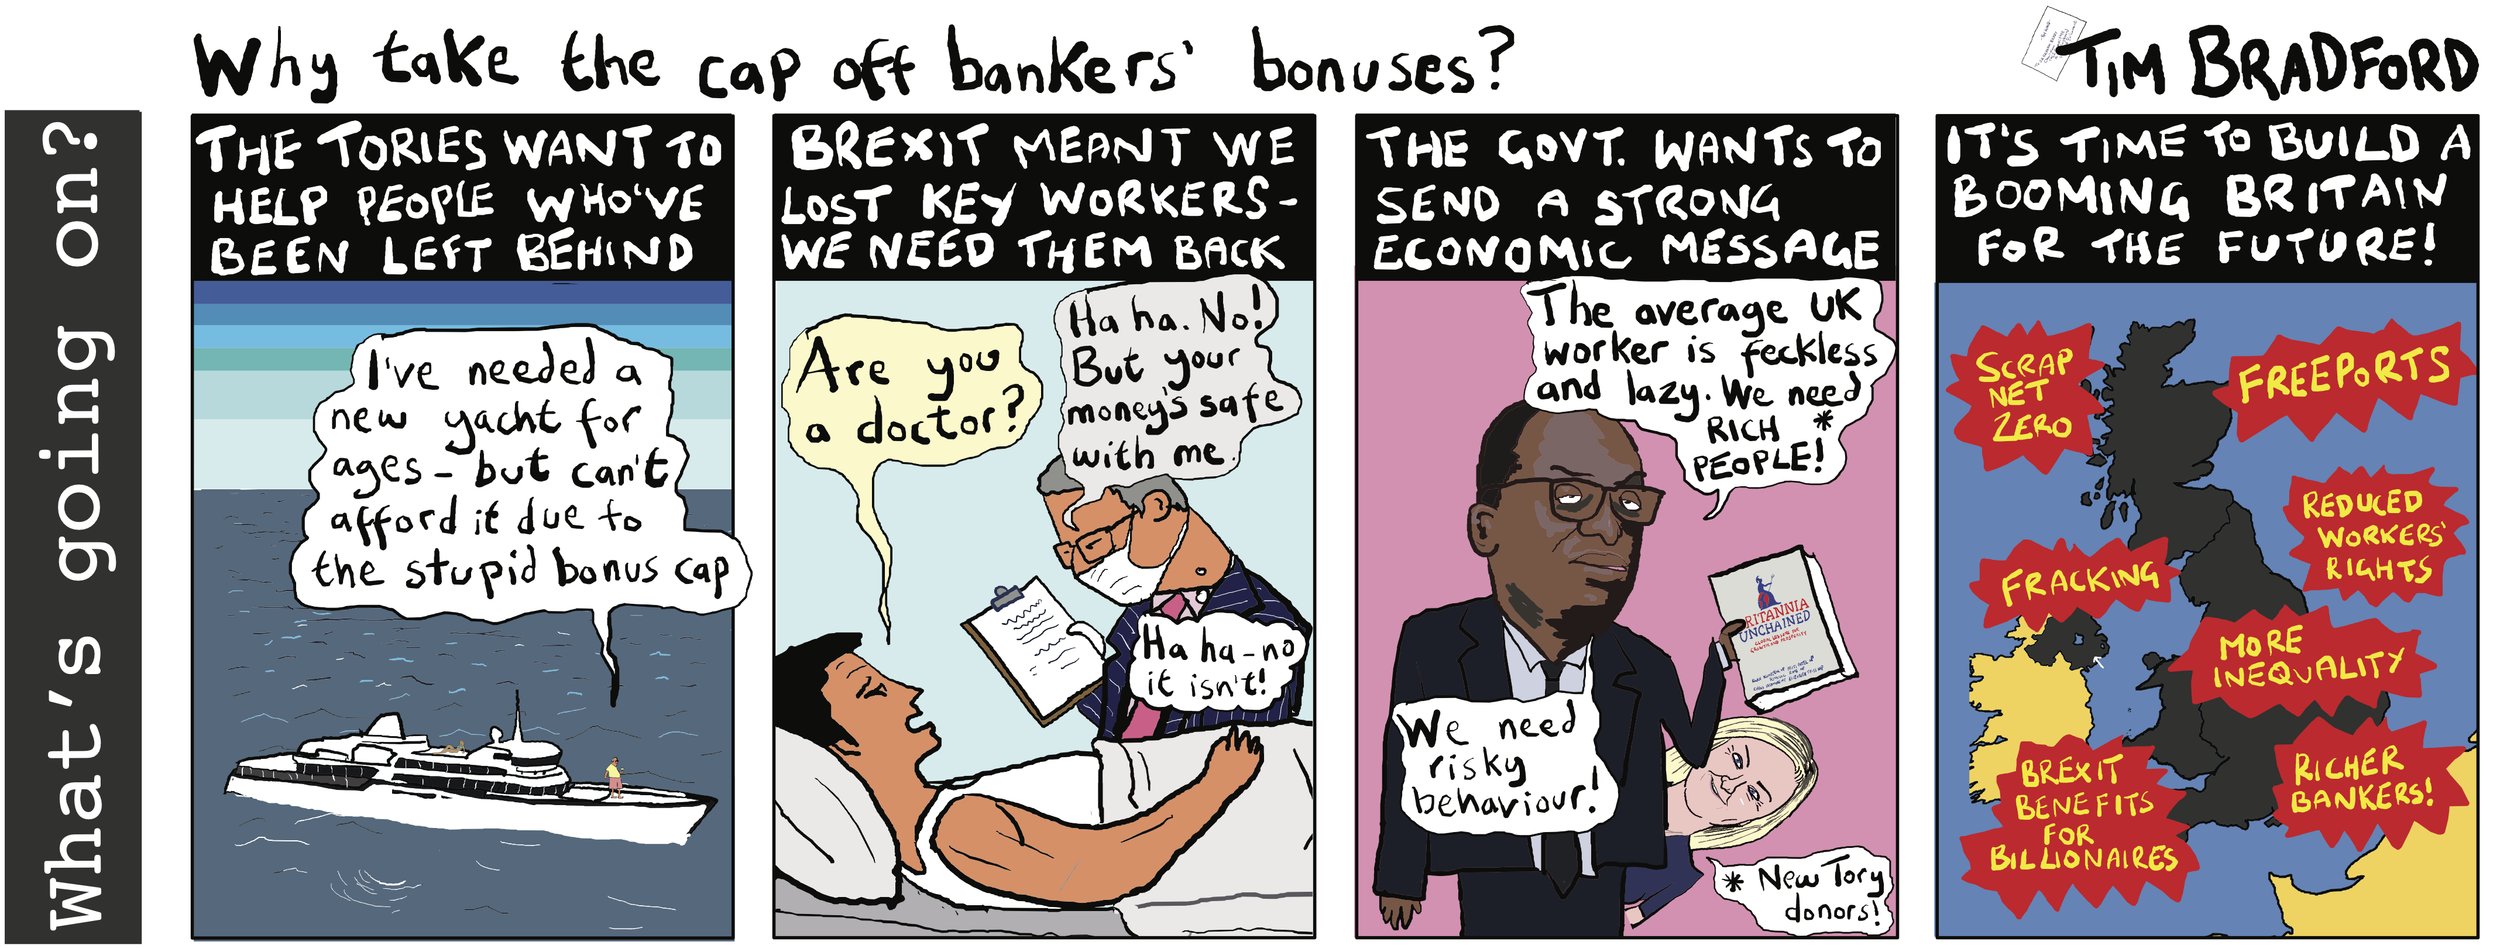 Why take the cap off bankers' bonuses? - 12/09/2022